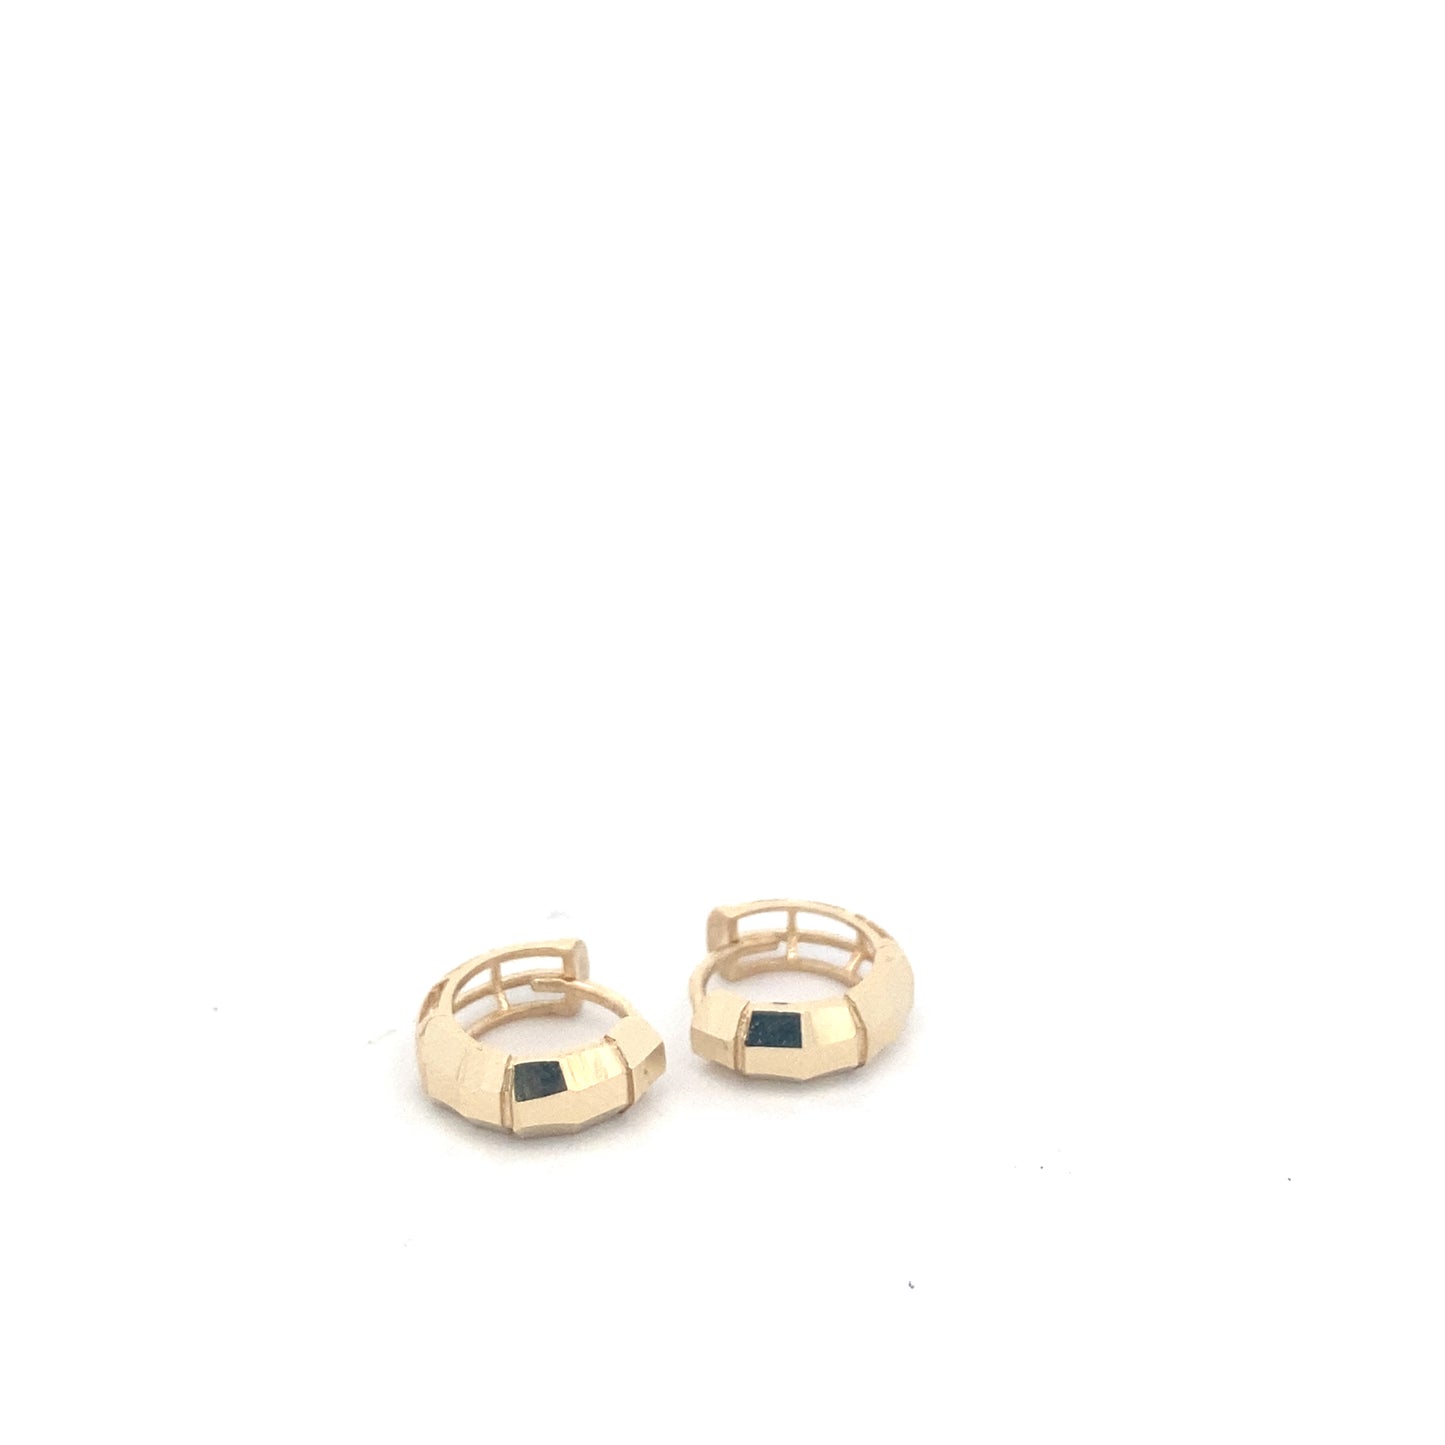 14K Gold Fancy Hoops Earrings | Luby Gold Collection | Luby 